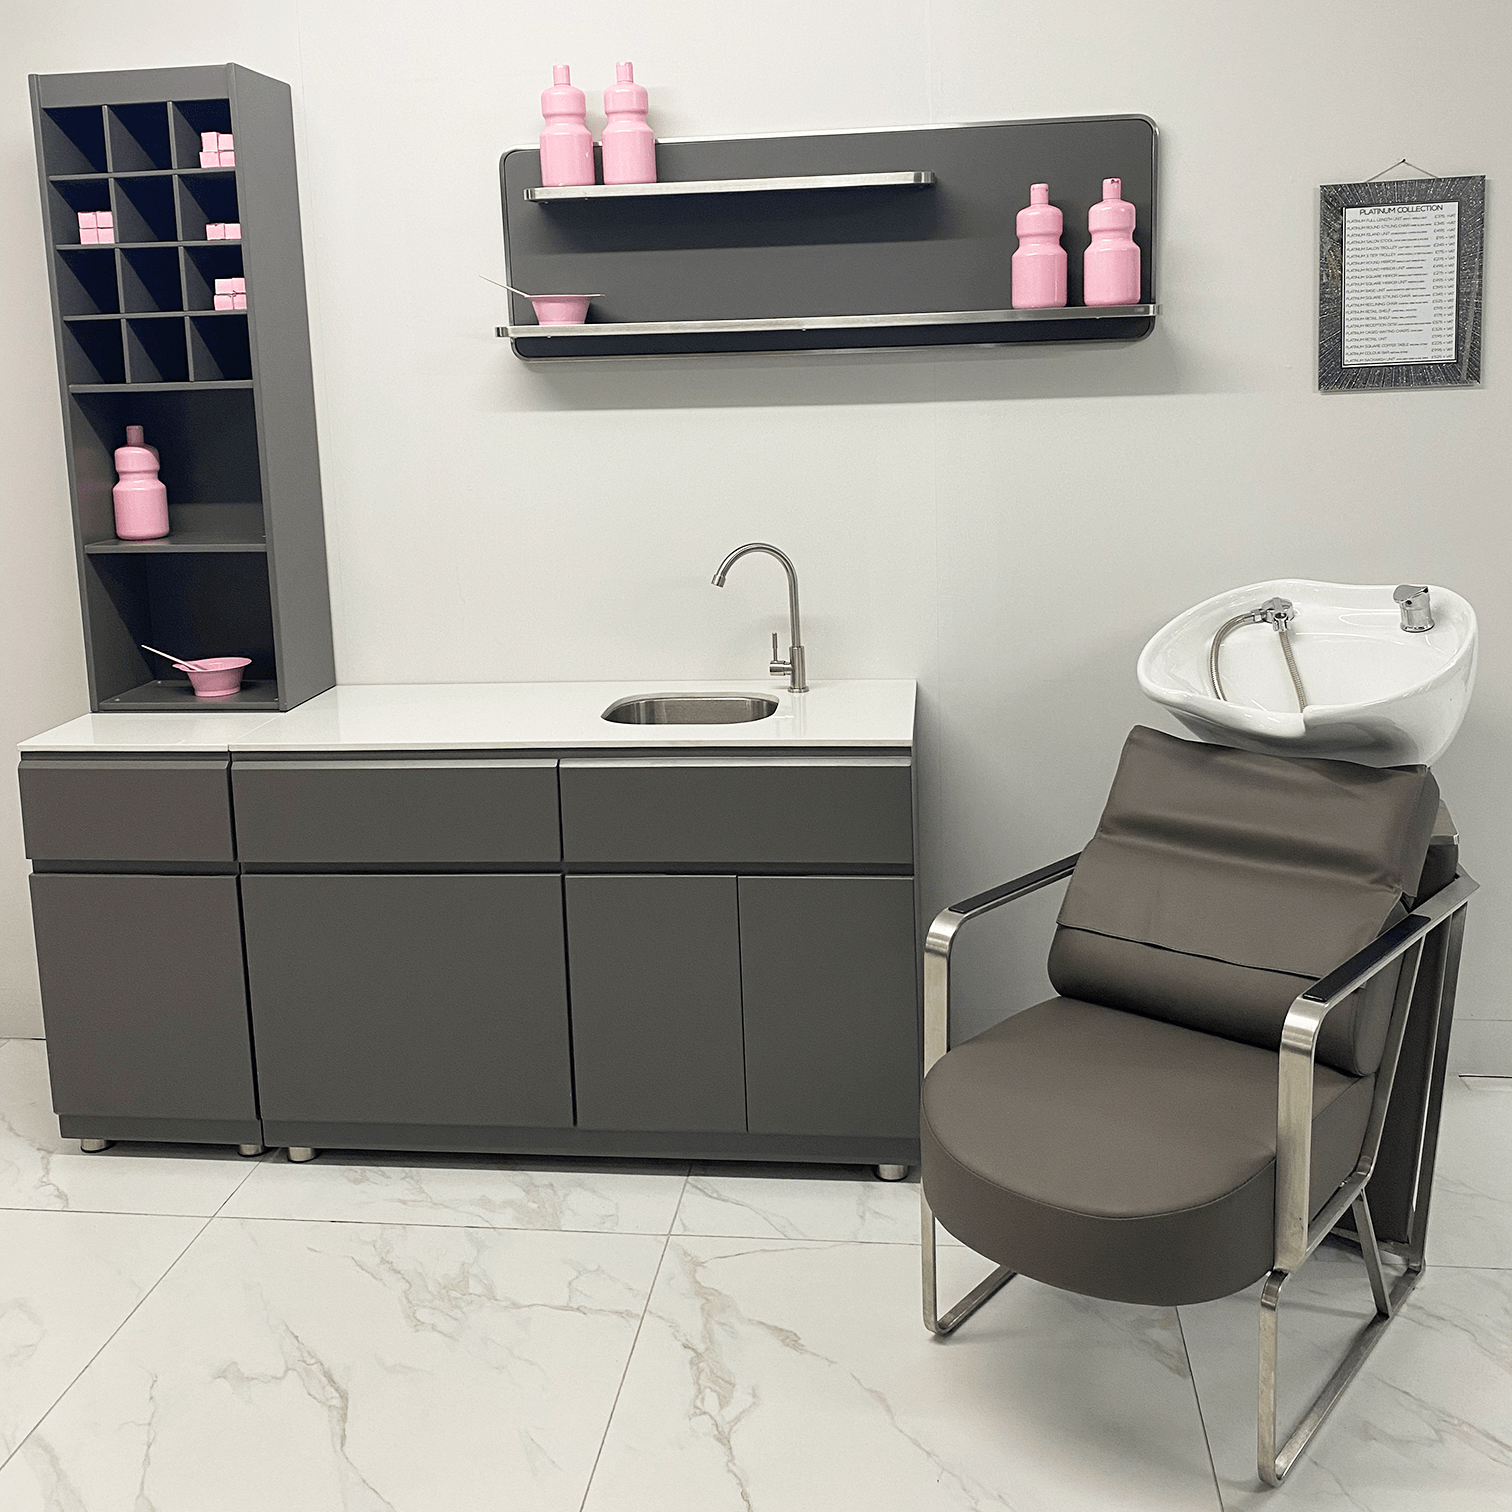 The Windsor Colour Bar - Dove Grey with White Natural Stone By SEC